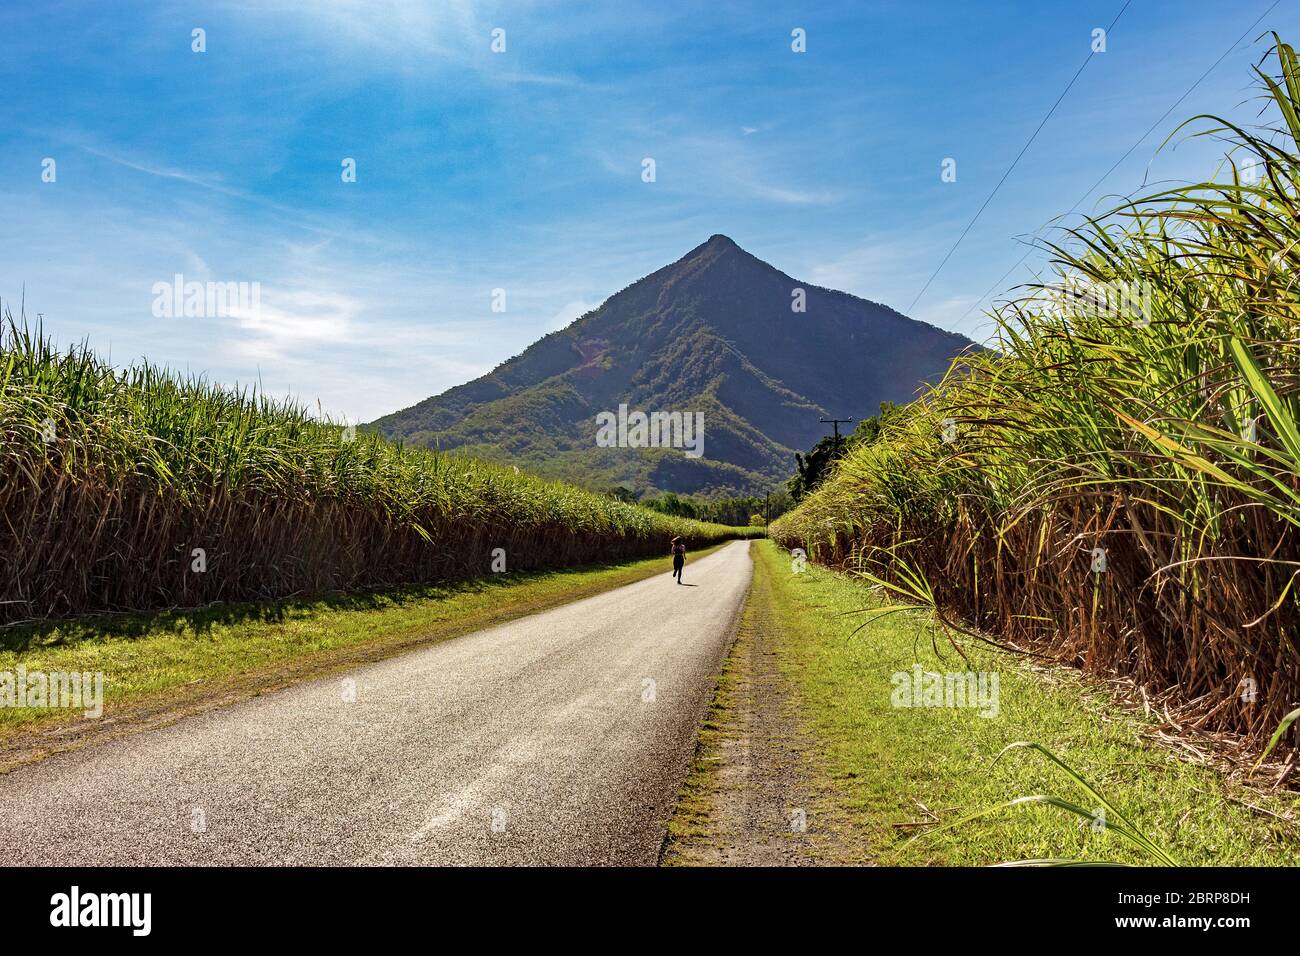 Walsh’s Pyramid south of Cairns is a spectacular 922m tall freestanding natural pyramid viewed from behind with sugarcane field perspective Stock Photo